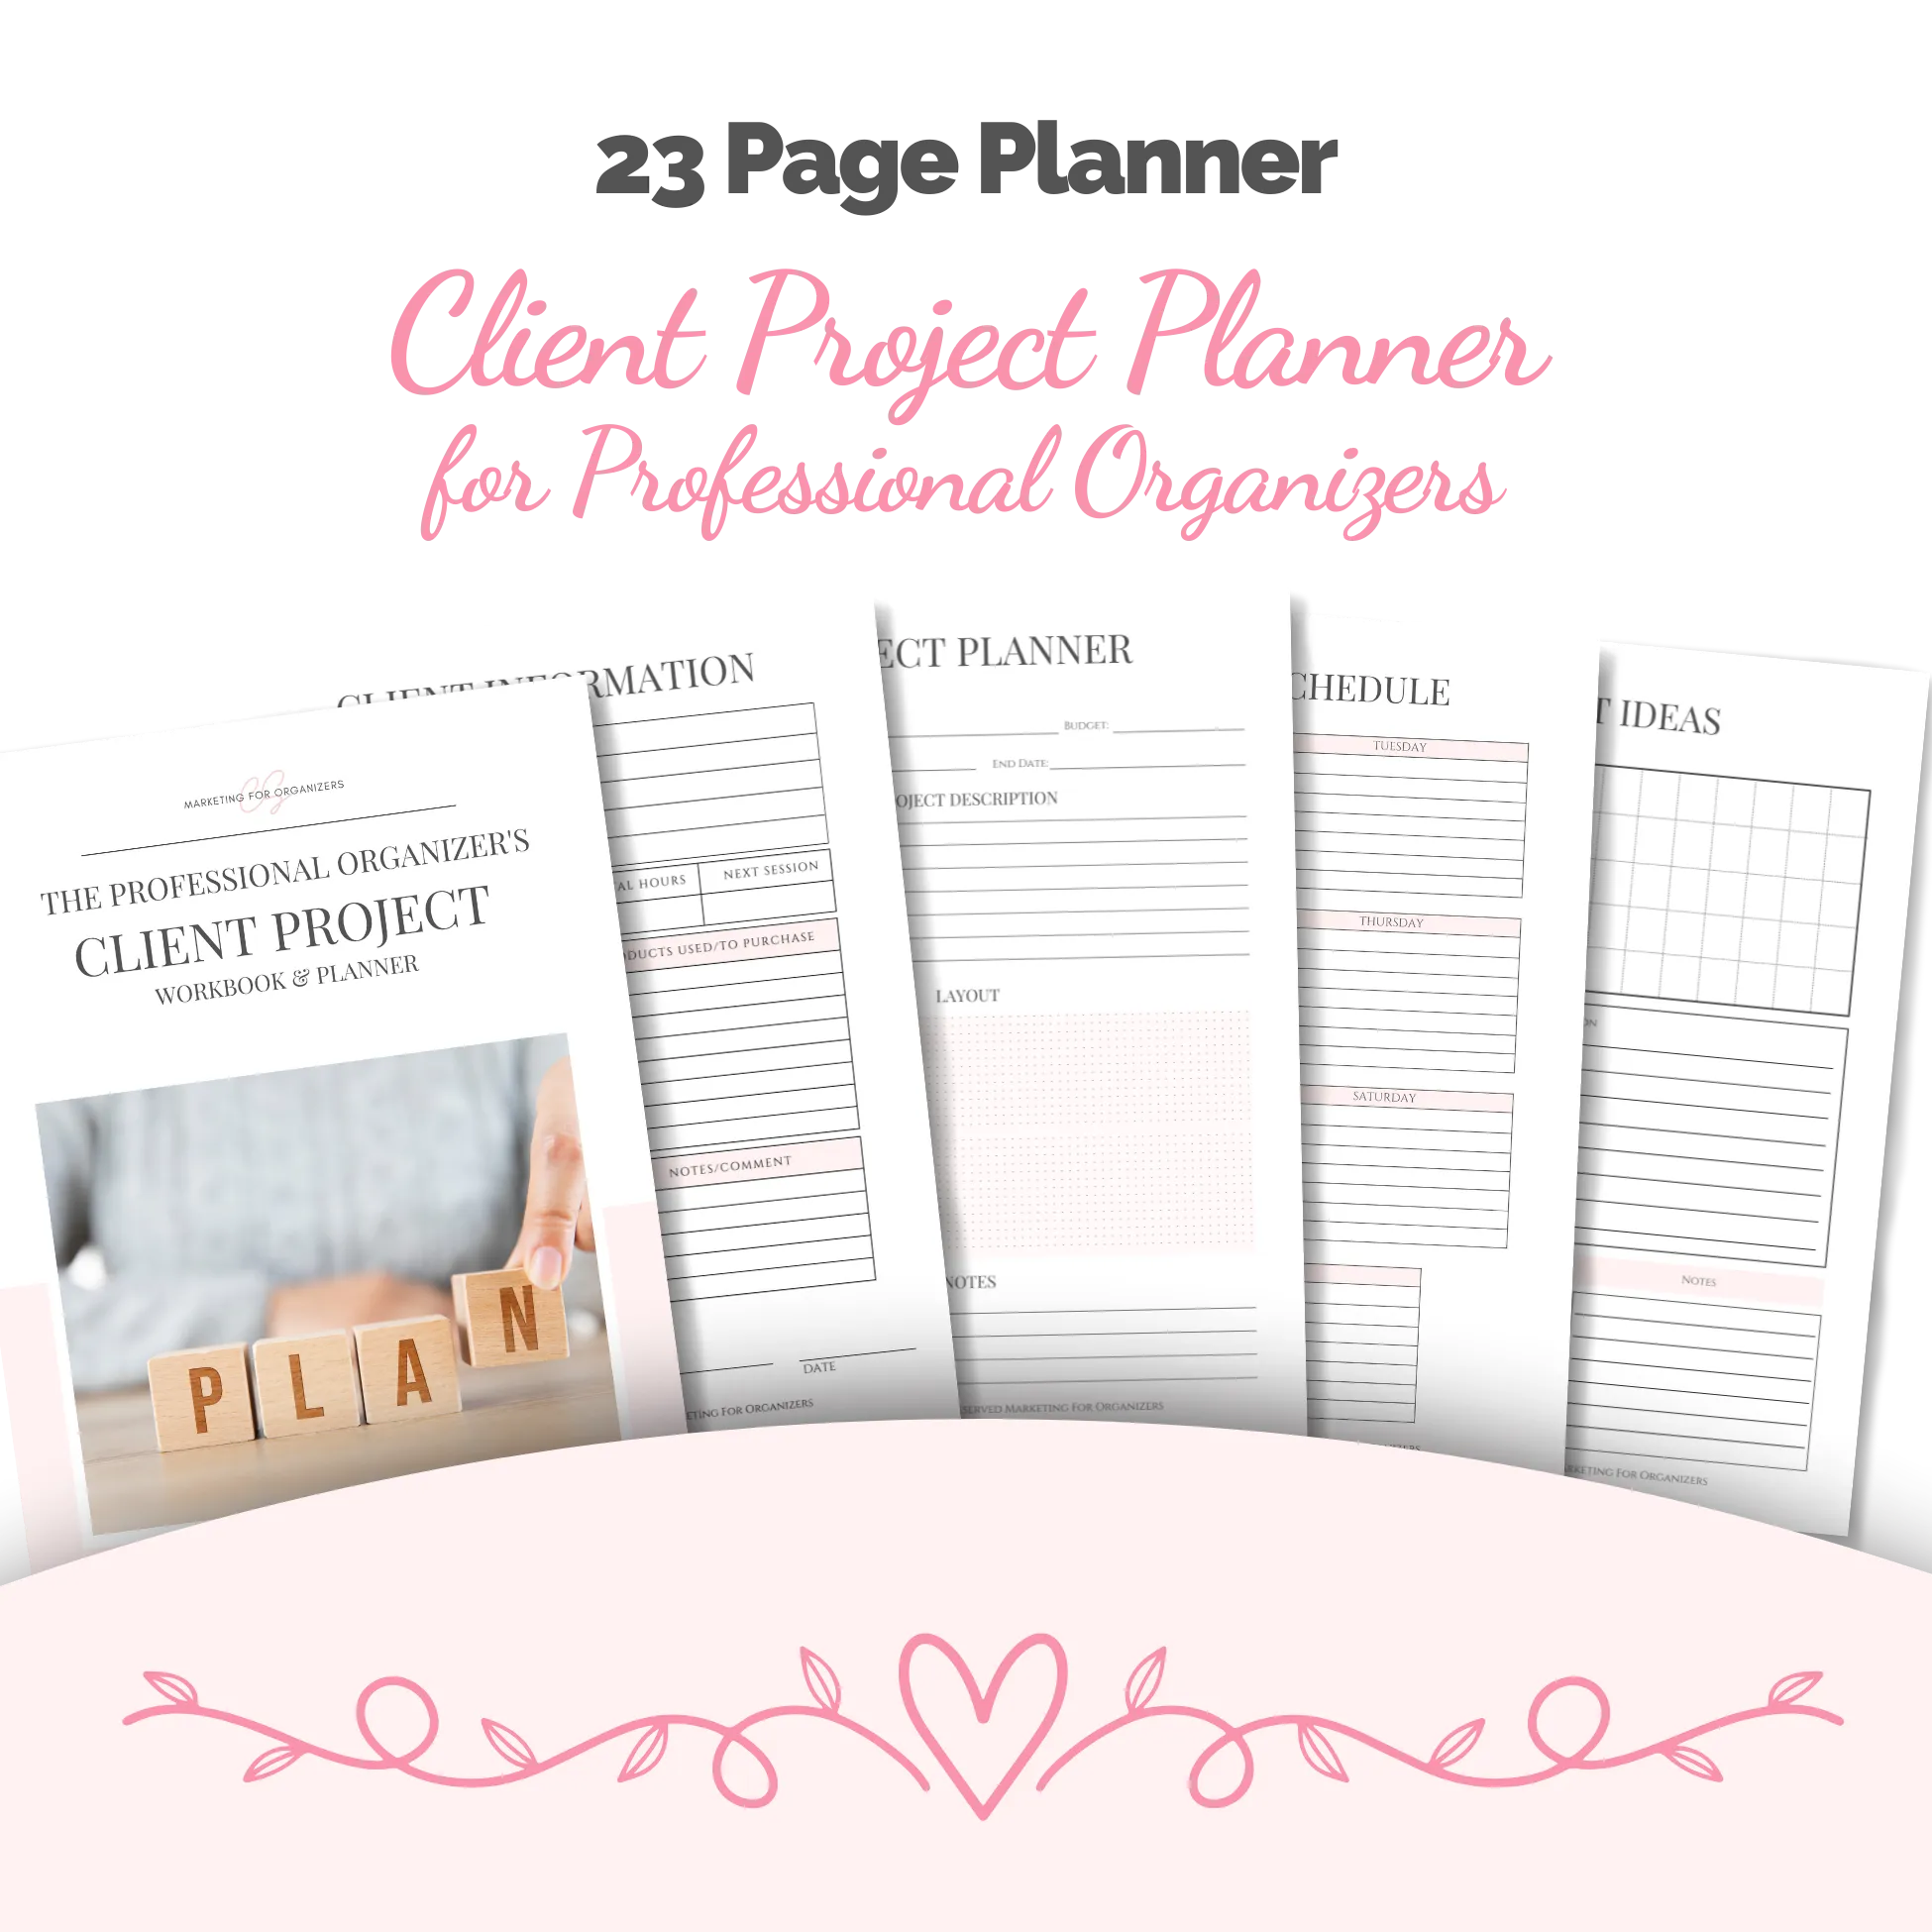 Creating Serenity Professional Organizing Client Planner for Professional Organizer Mockup